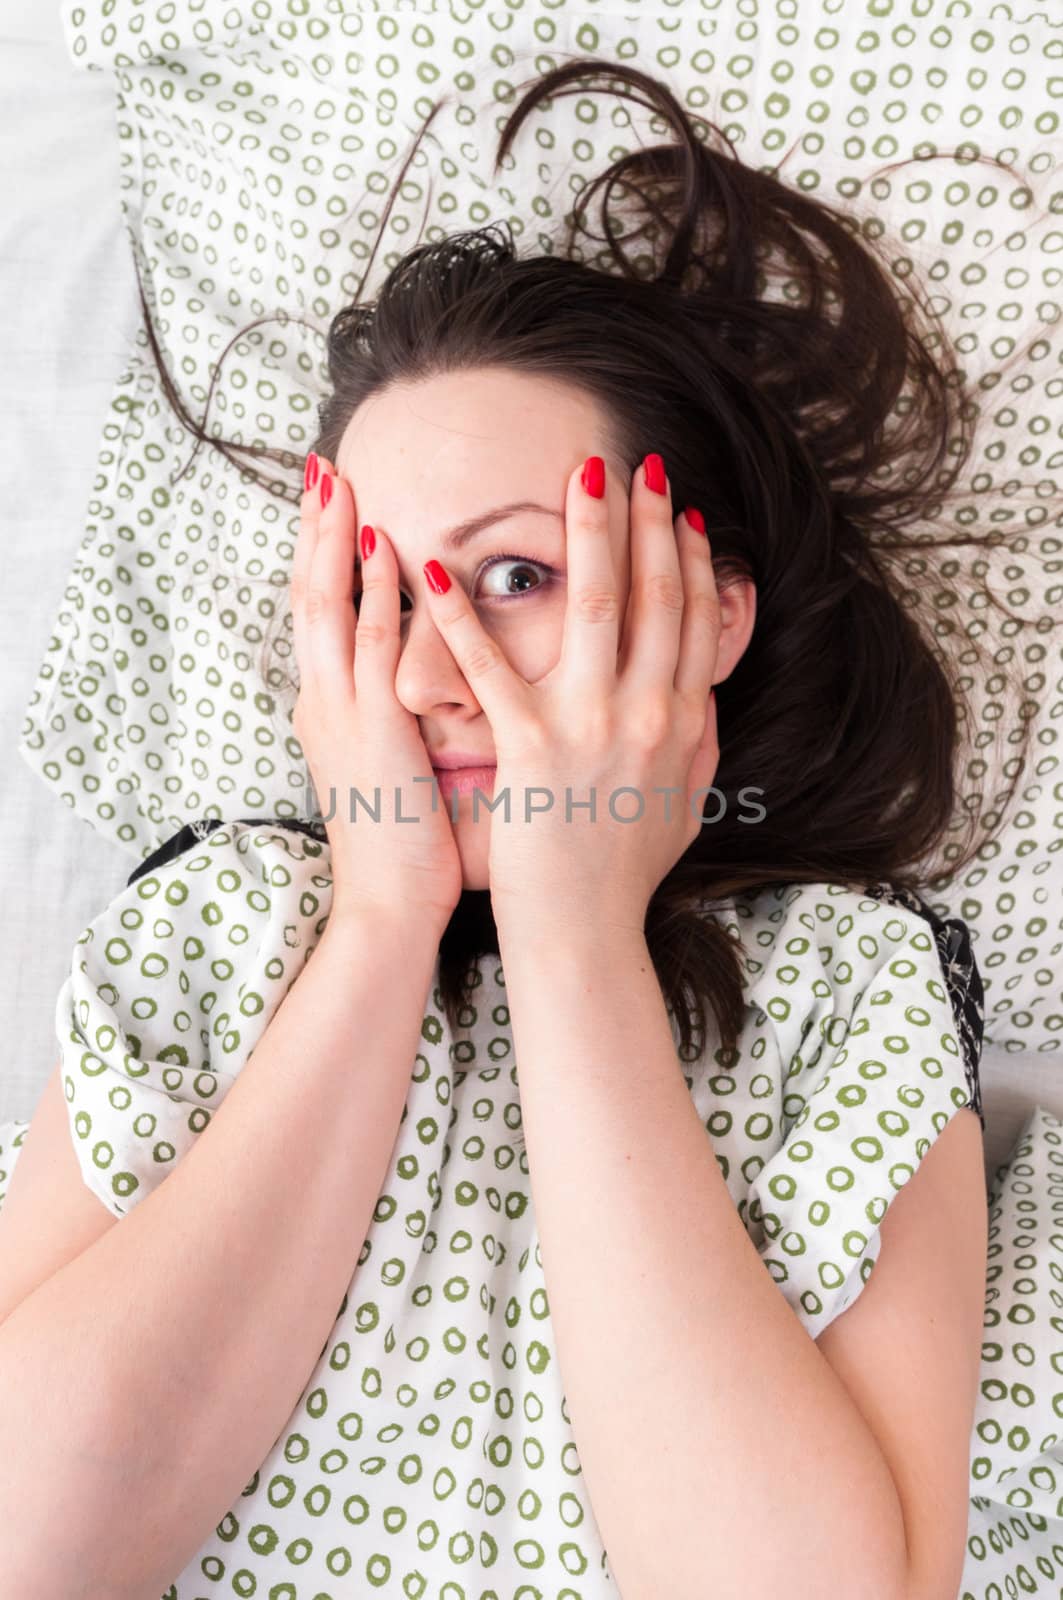 Young woman in the bed in bright light